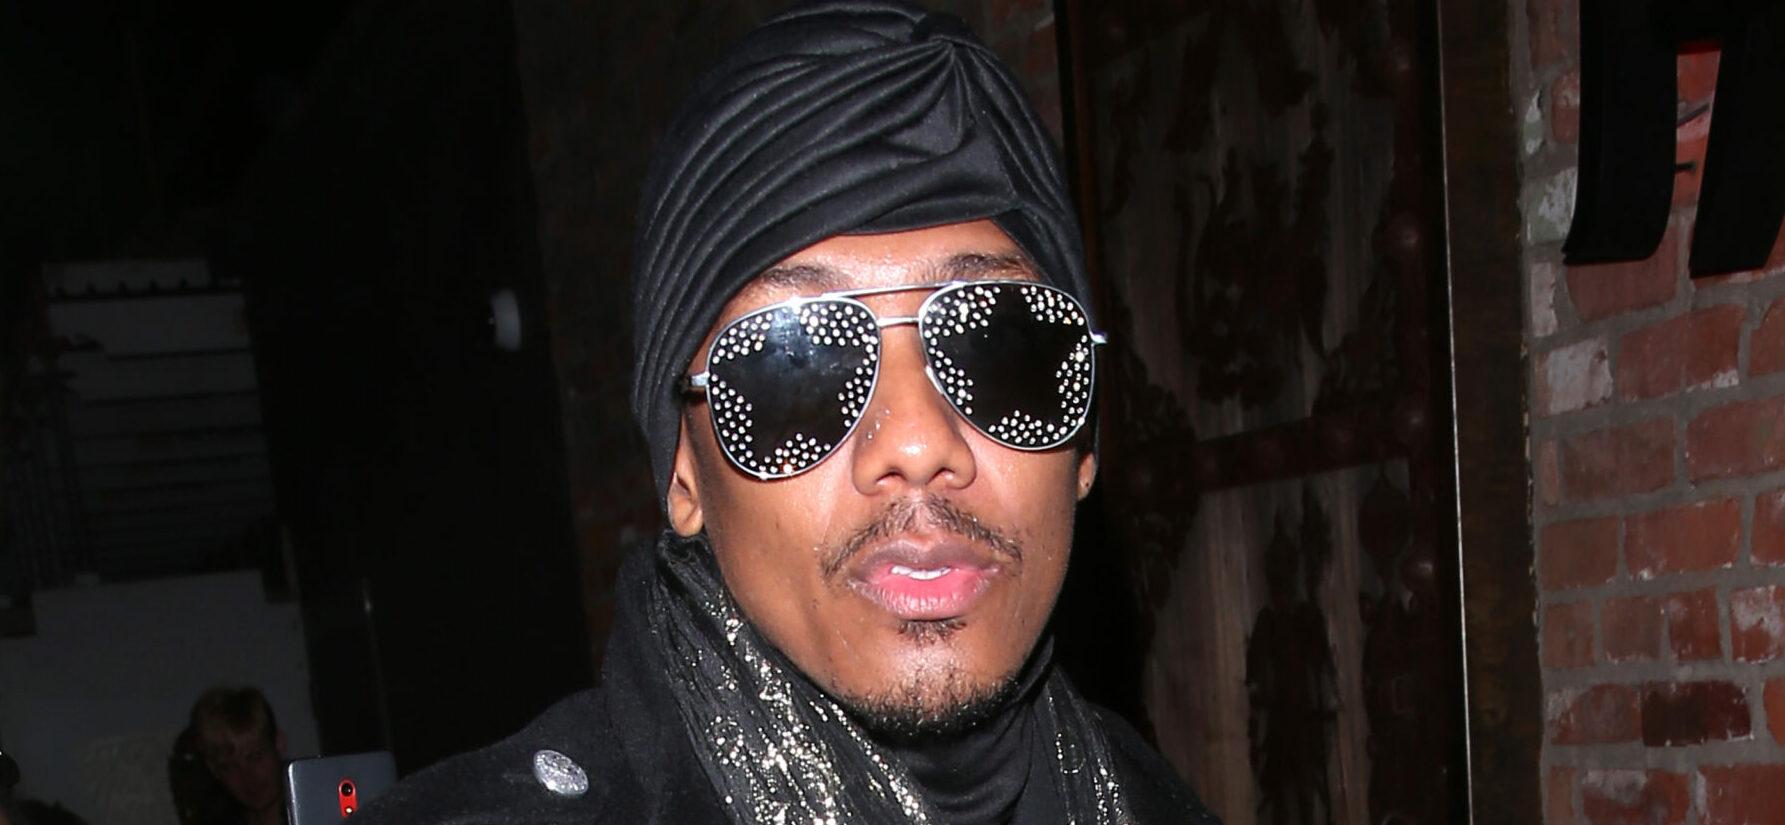 Nick Cannon On Vasectomy: ‘I No Longer Want To Be Careless, Wanna Be Intentional’